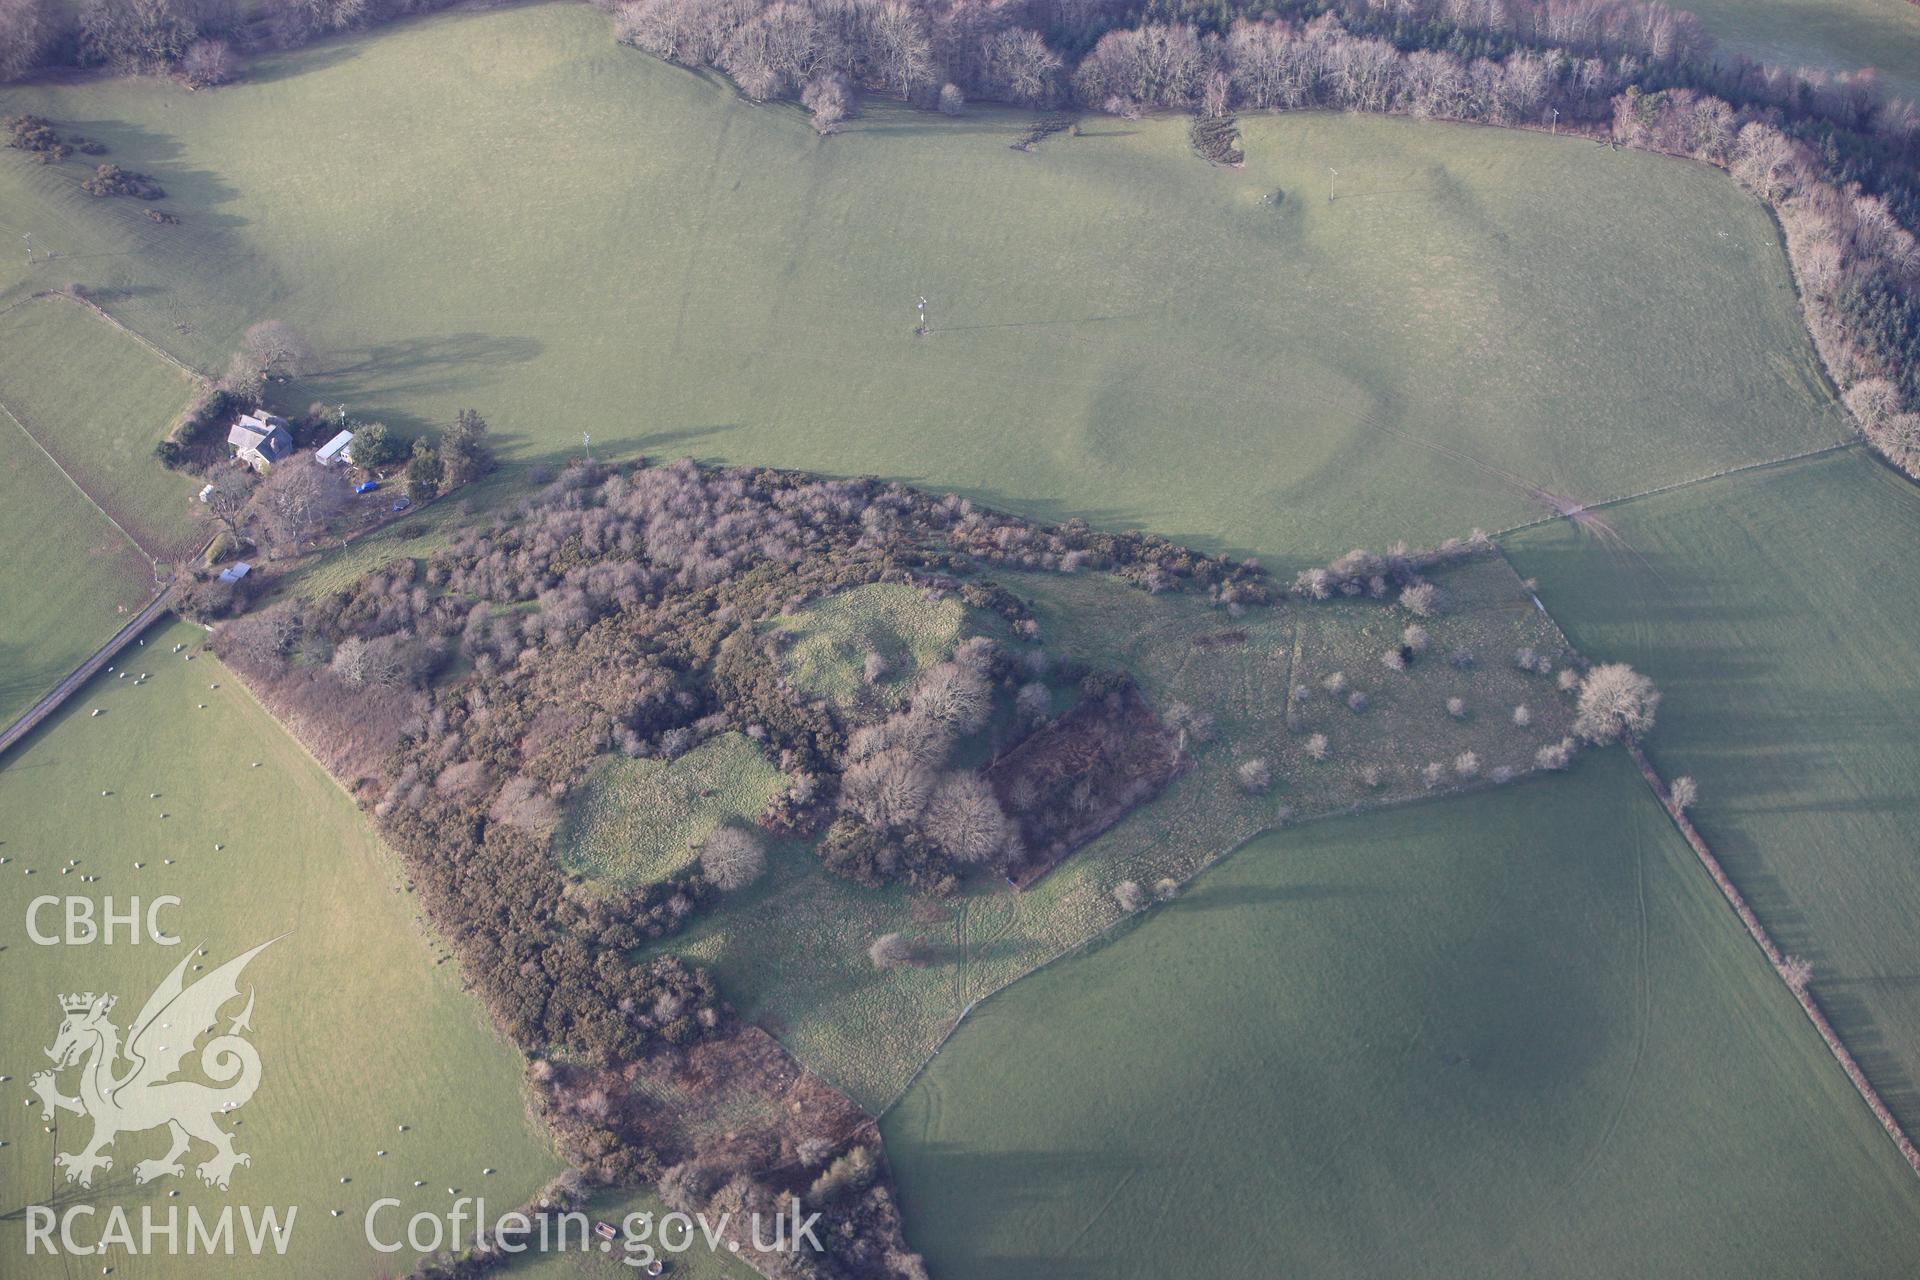 RCAHMW colour oblique photograph of Pen-Y-Castell, Llanilar. Taken by Toby Driver on 07/02/2012.